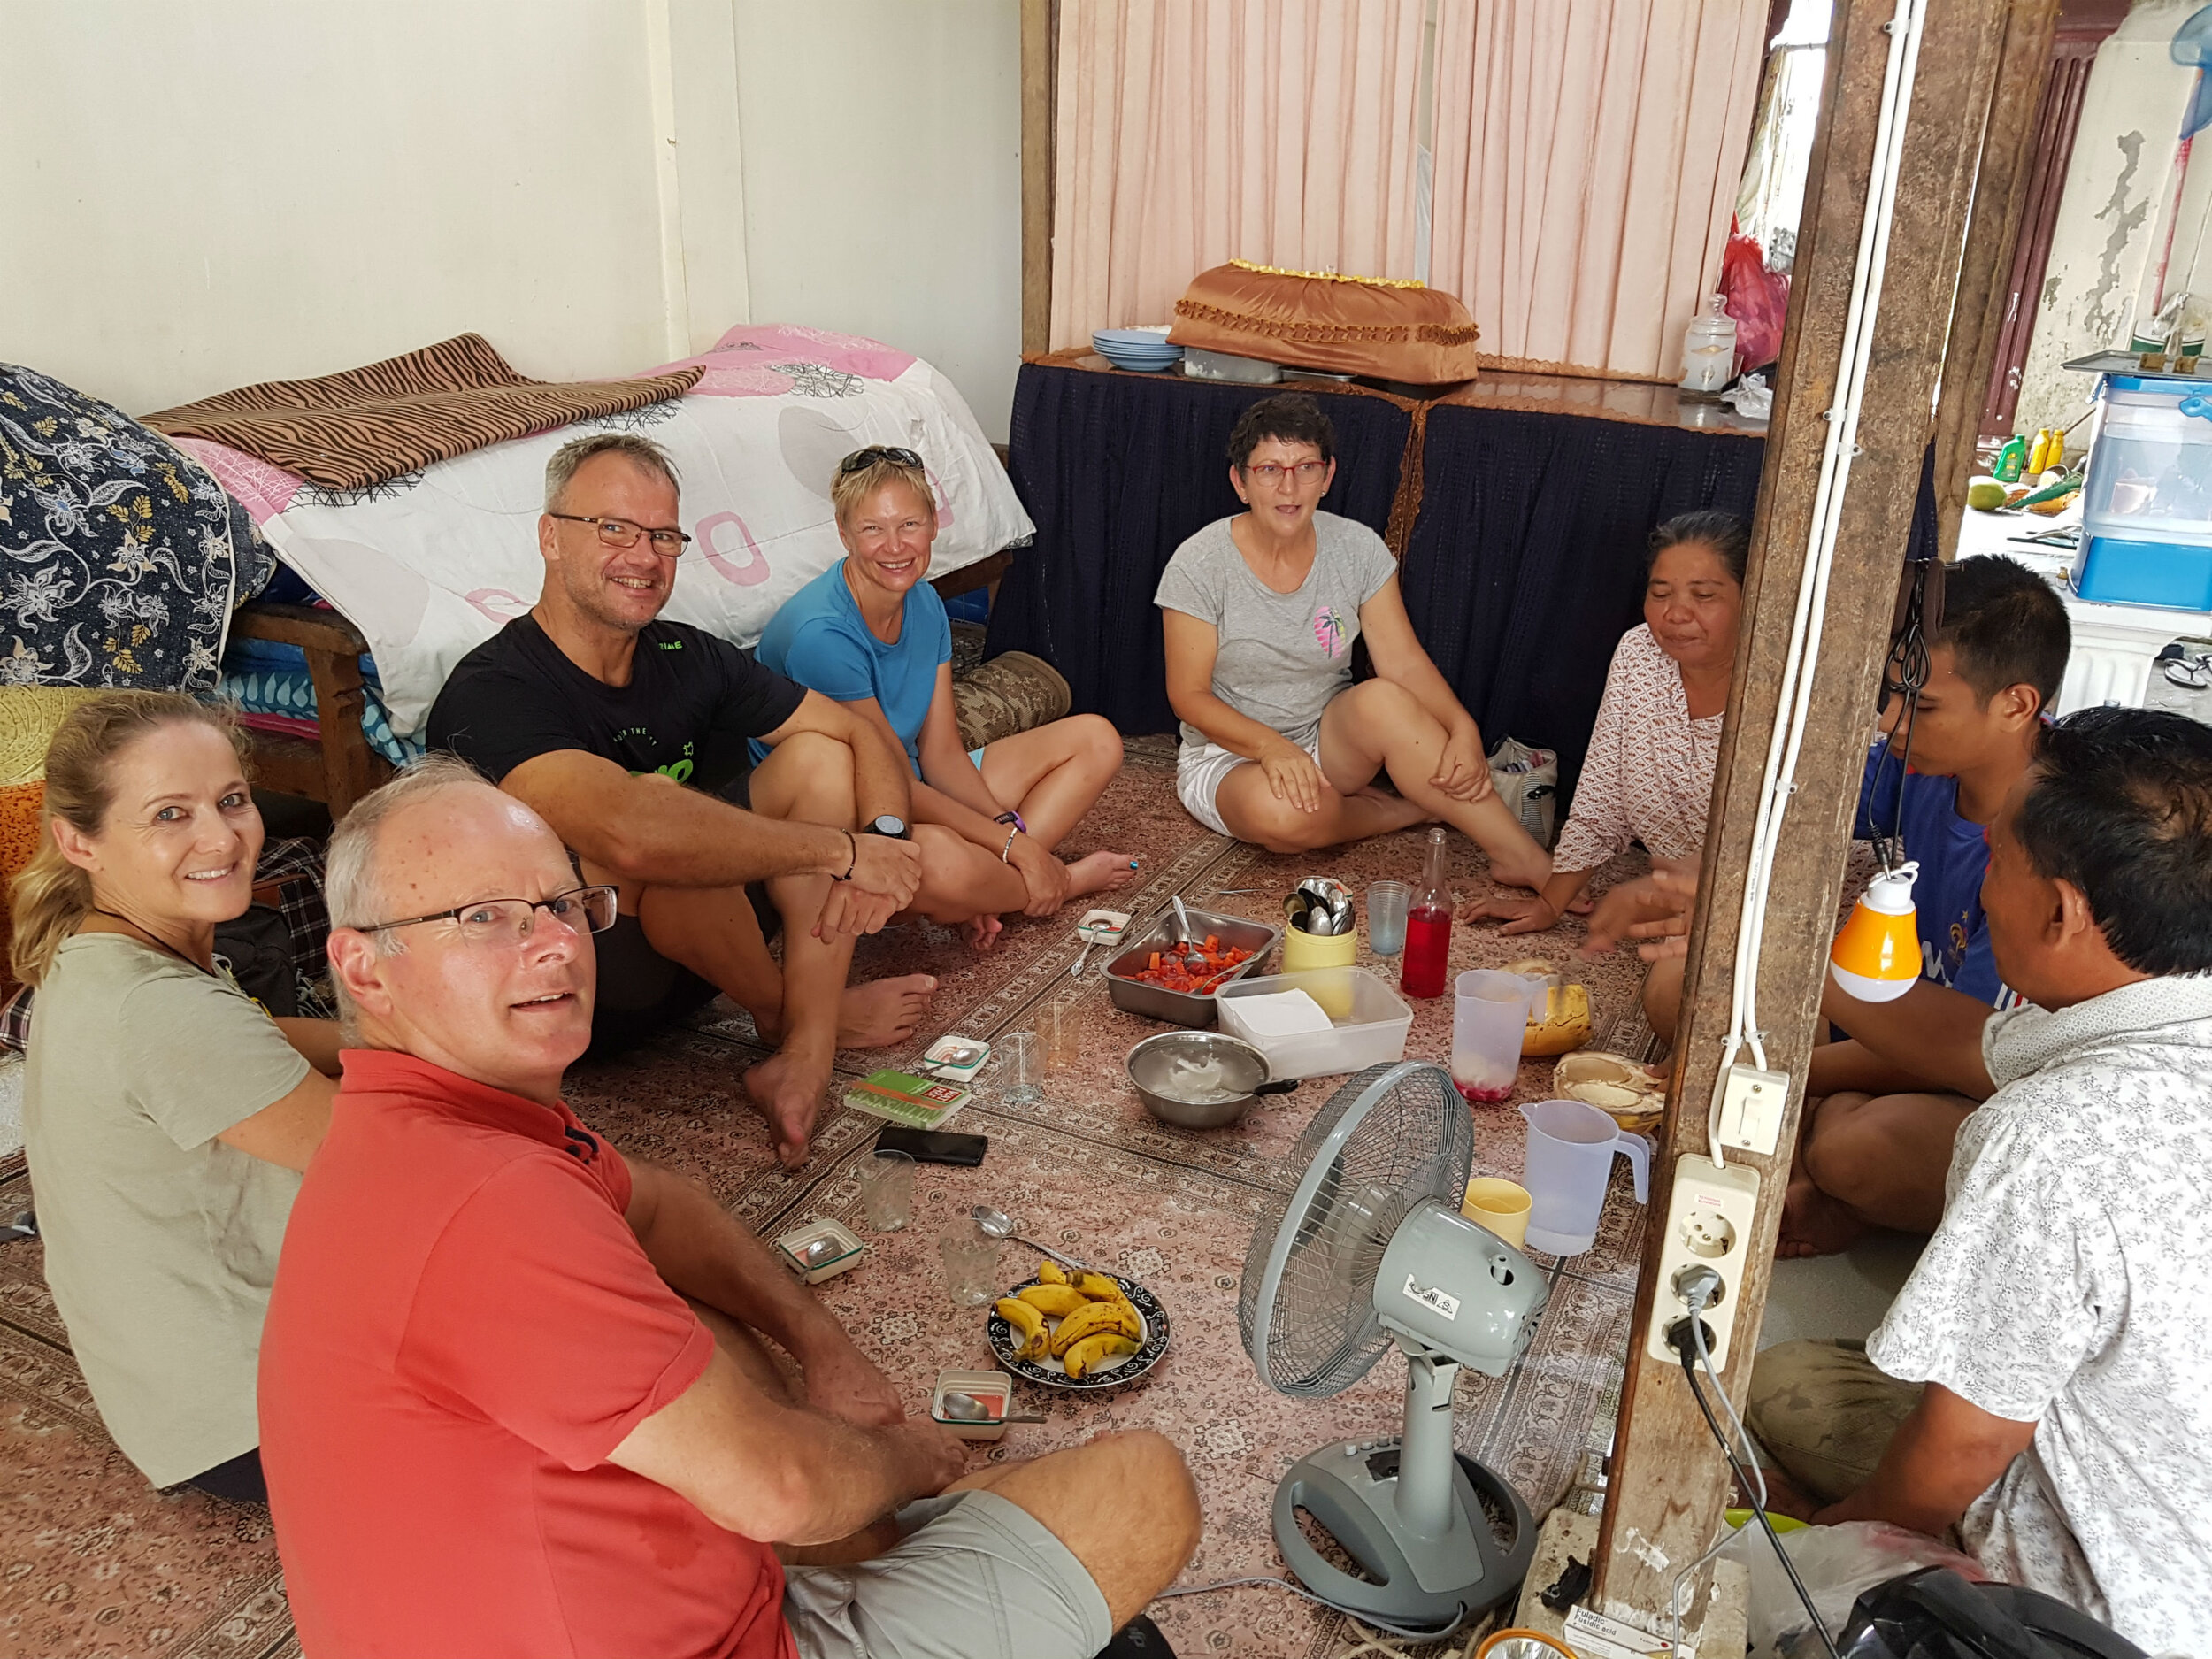 Frank, Carla, Gert, Suzan and Francien welcomed by caretaker family Dutch cemetery in Banda Achee